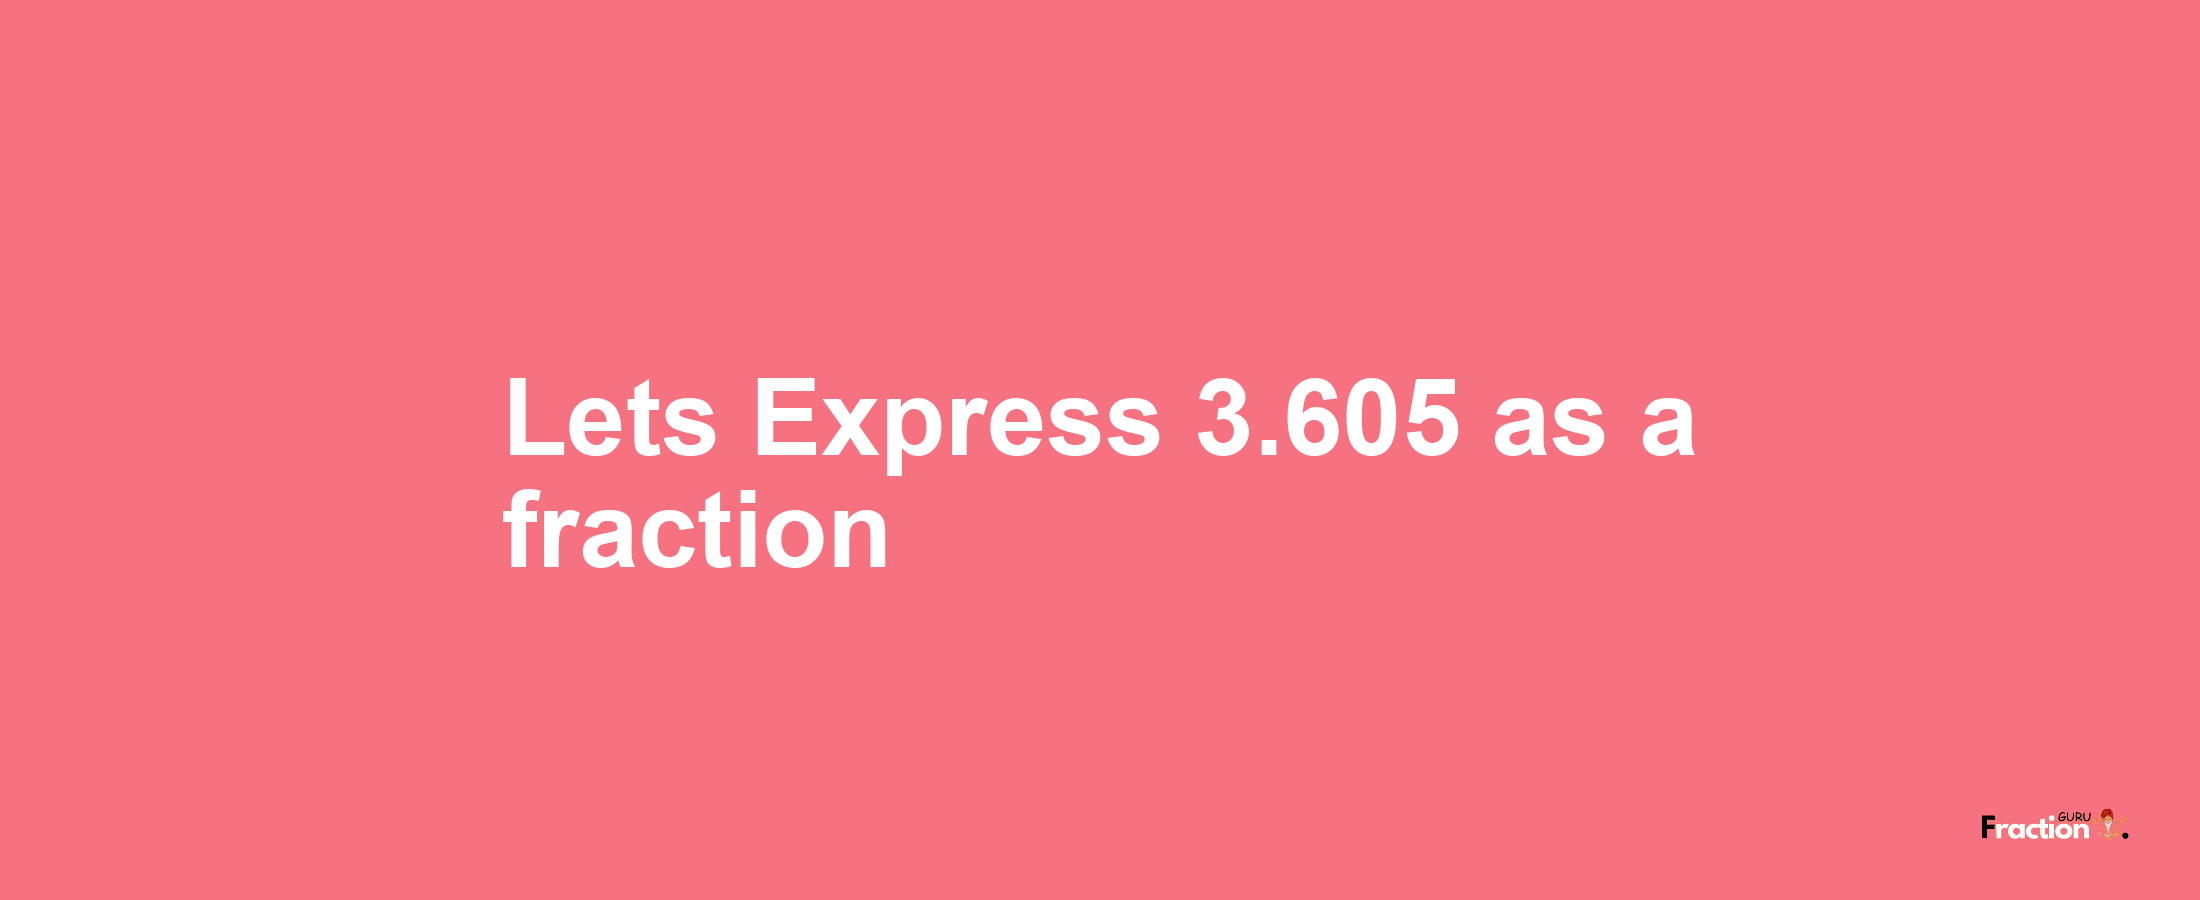 Lets Express 3.605 as afraction